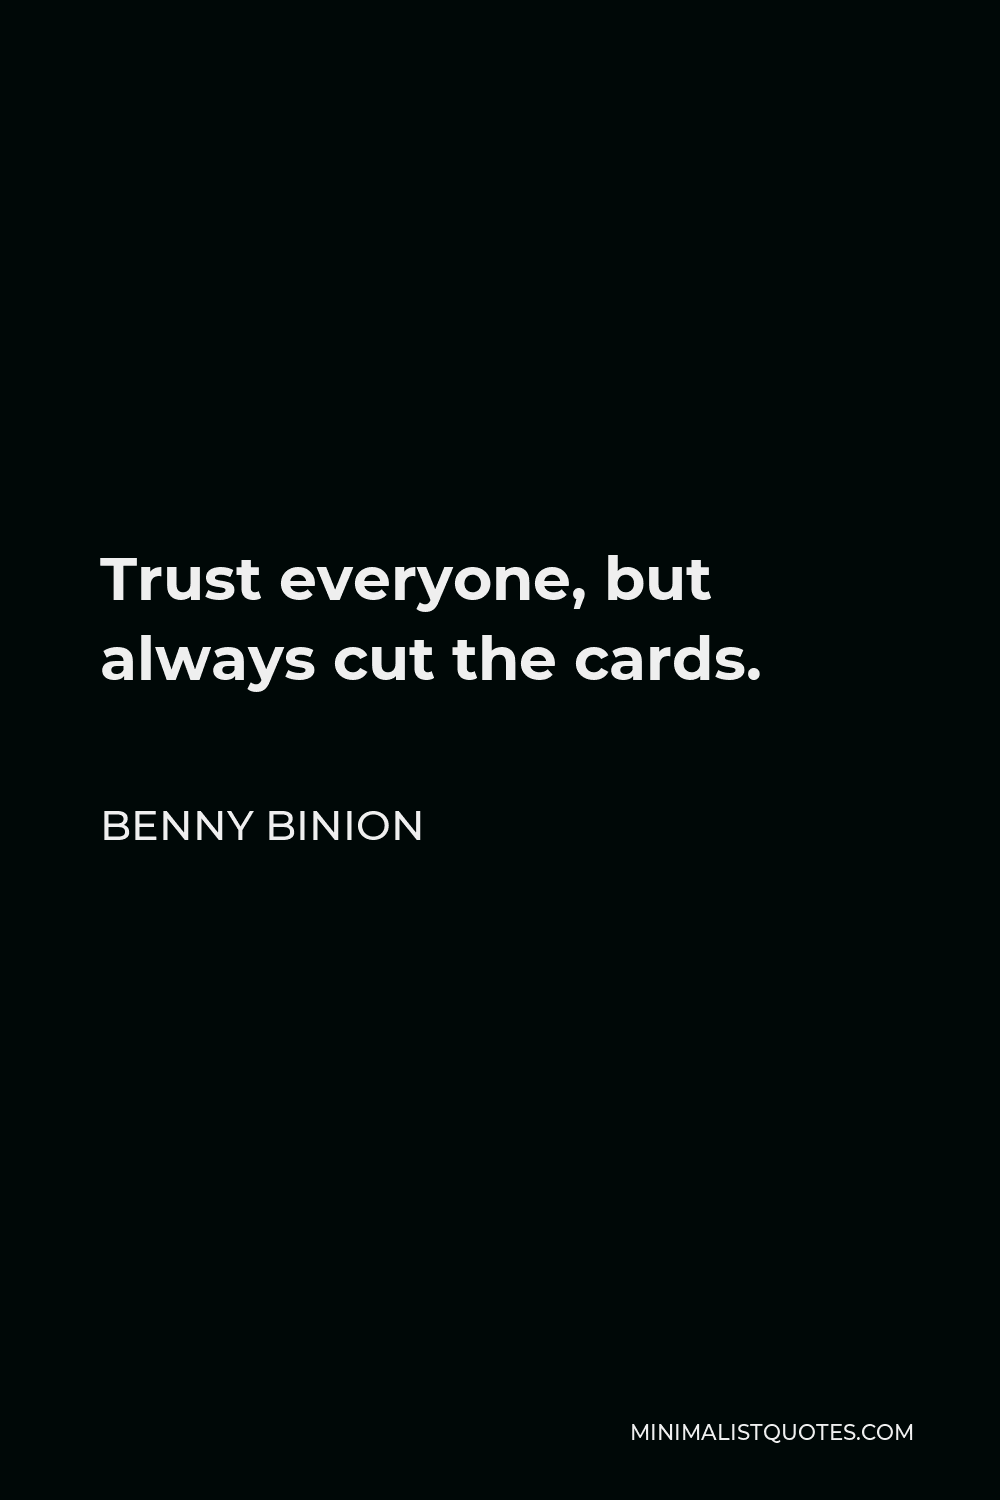 Benny Binion Quote - Trust everyone, but always cut the cards.